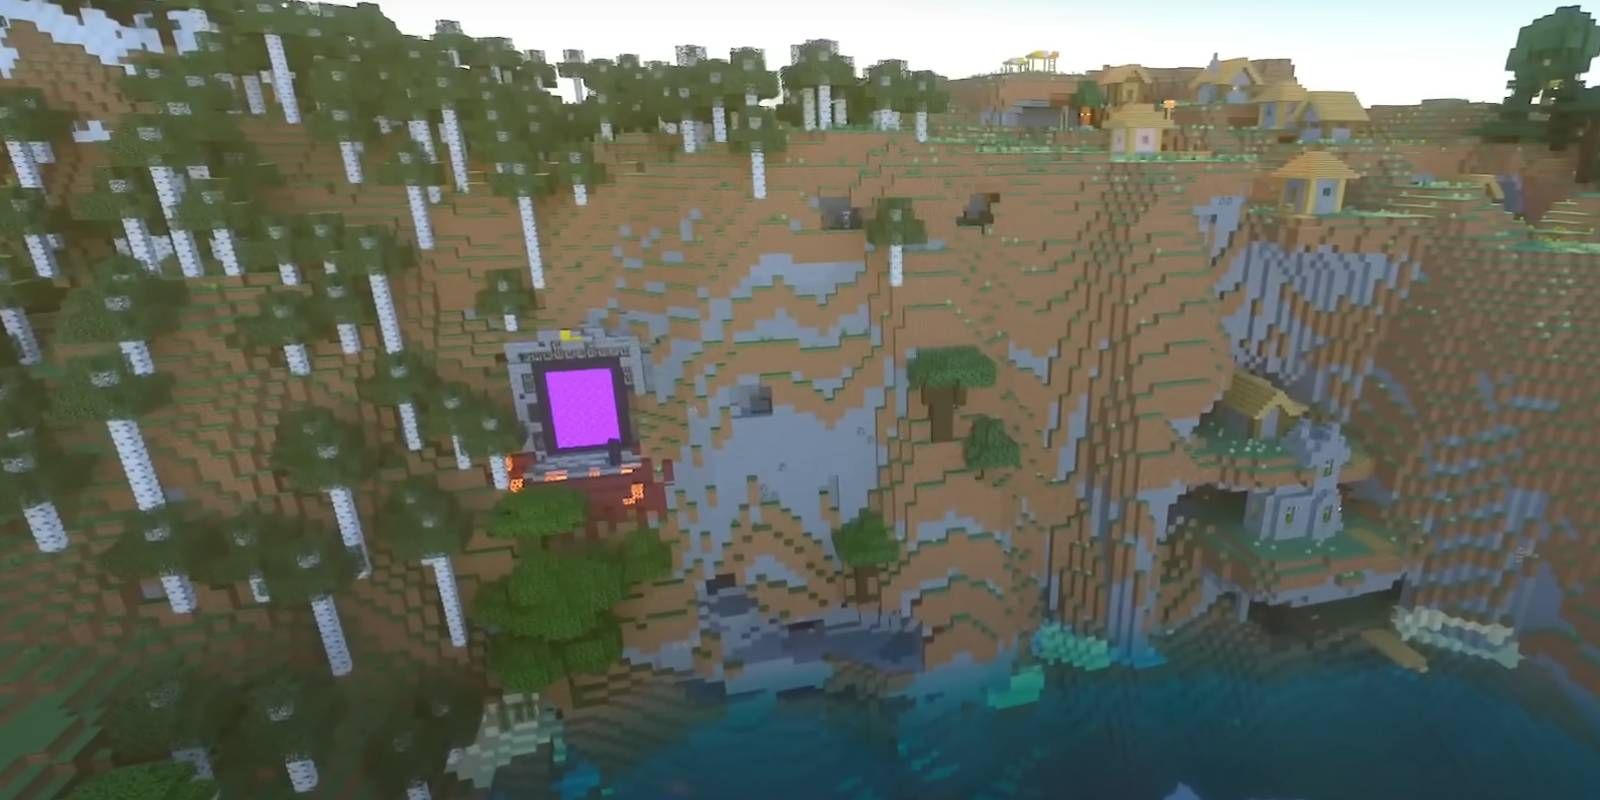 Minecraft Village and Nether Portal from "Lakes of Water and Fire" 1.20 Bedrock world seed